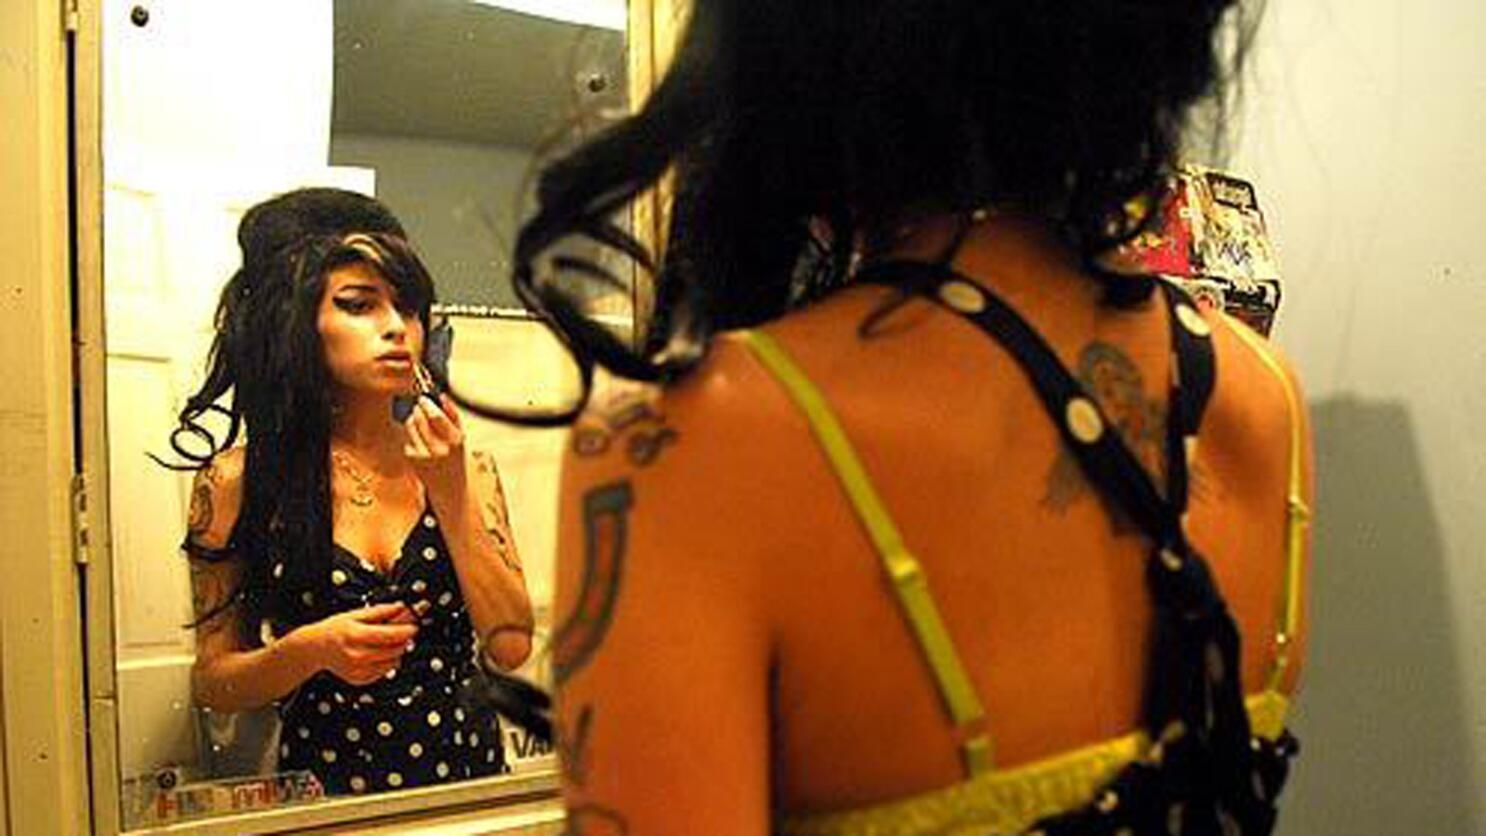 Camden New Journal hits back at critics over Amy Winehouse